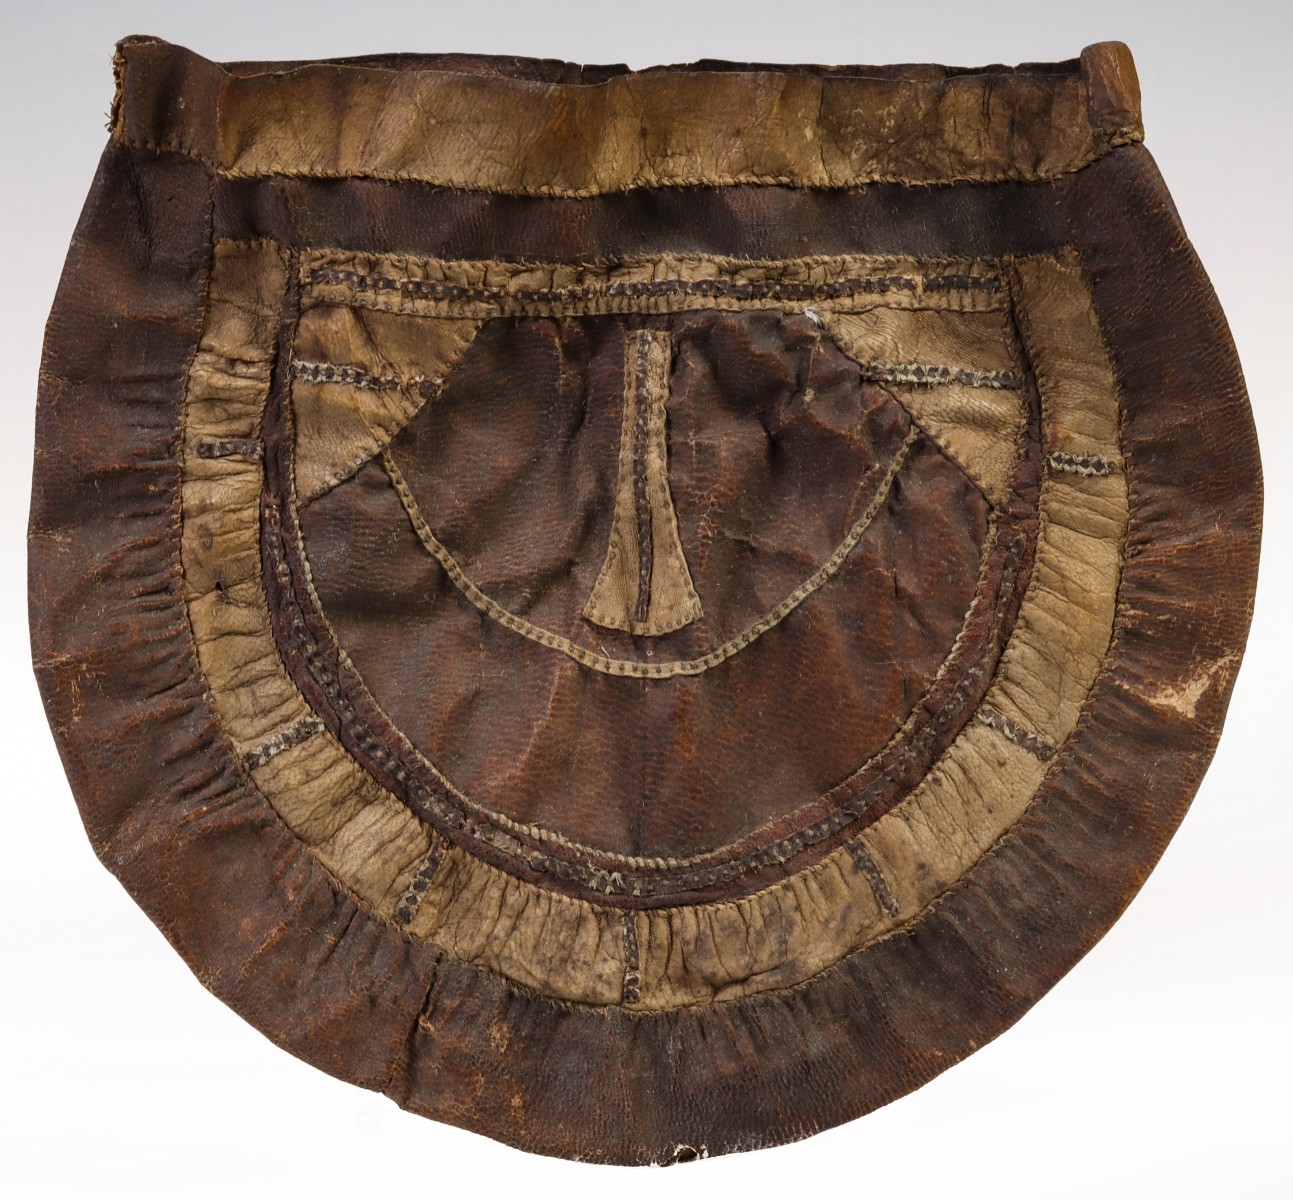 AN INTERESTING ATHABASCAN POUCH OF VARIOUS HIDE MATERIAL